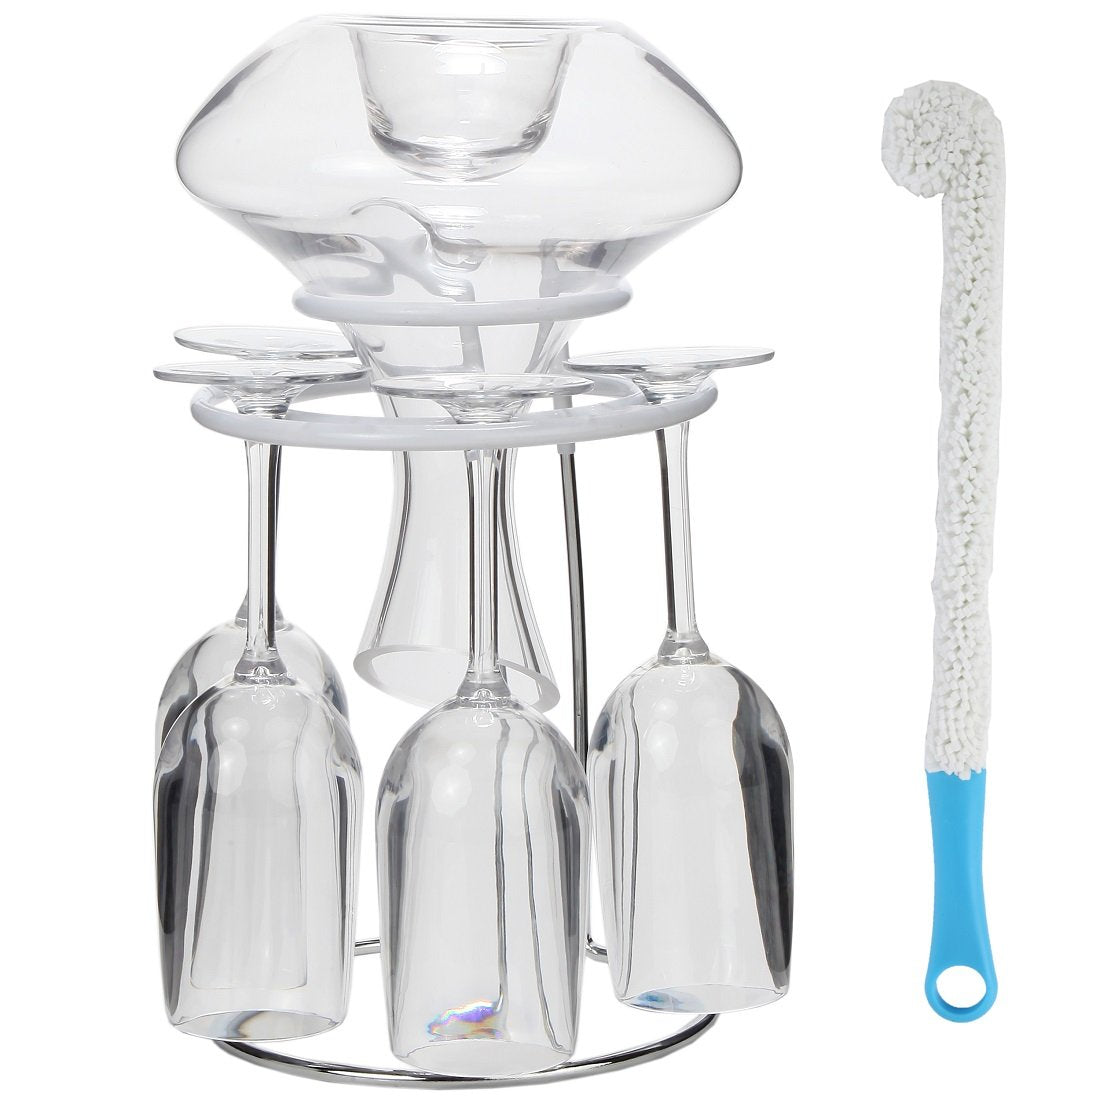 Lily's Home Decanter and Wine Glasses Drying Stand, with Rubber Coated Top to Prevent Scratches and Comes with a Decanter and Glasses Cleaning Brush (10.5 in x 7.5 in)